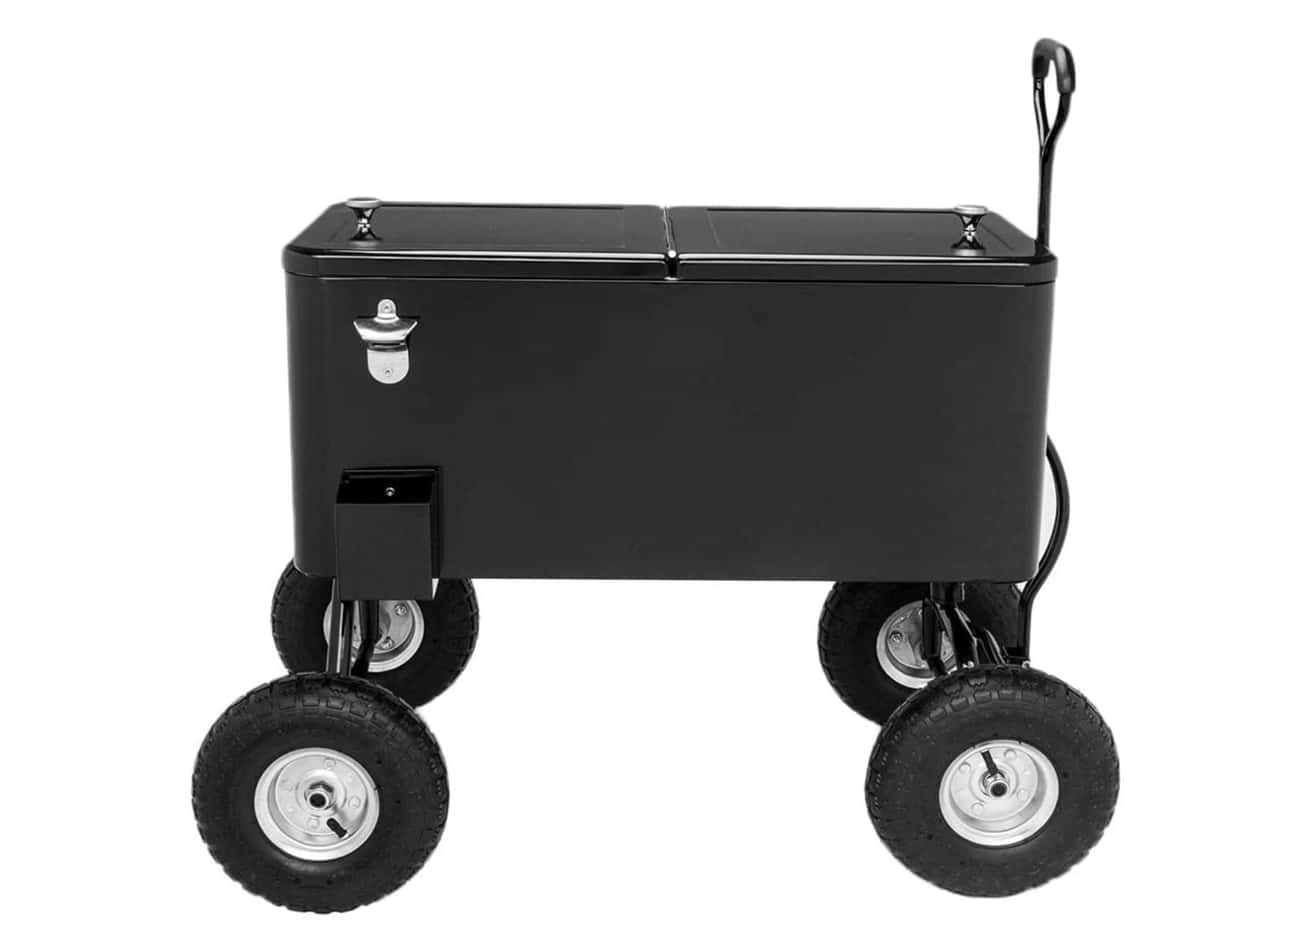 Cooler With Wheels That Can Handle Sand